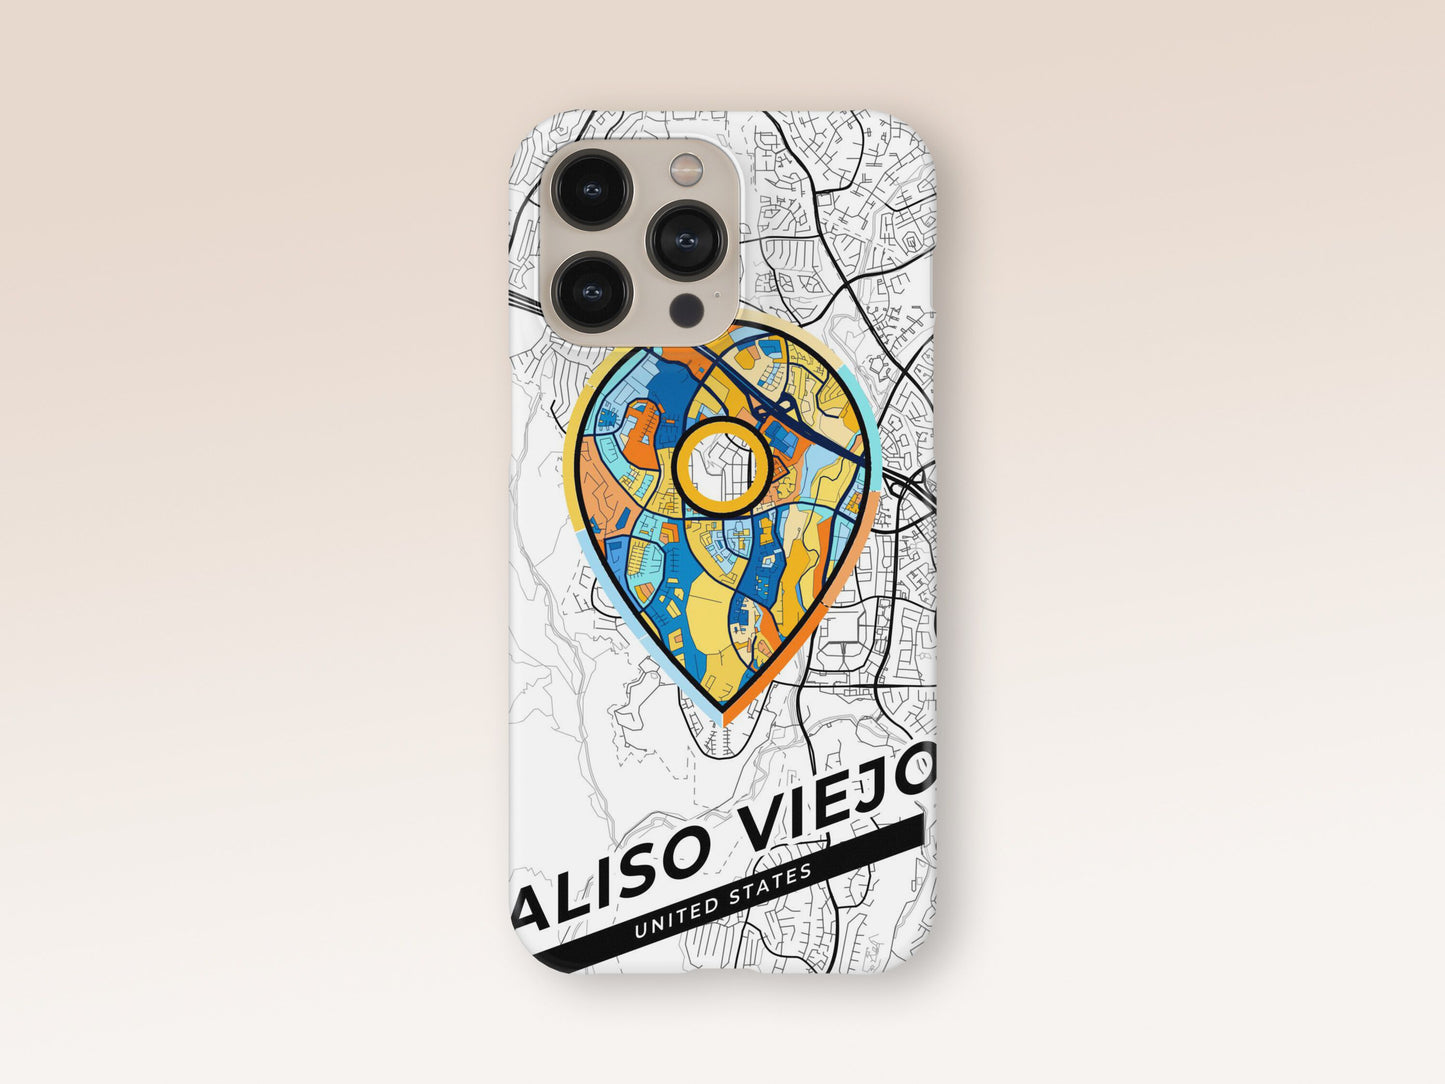 Aliso Viejo California slim phone case with colorful icon. Birthday, wedding or housewarming gift. Couple match cases. 1